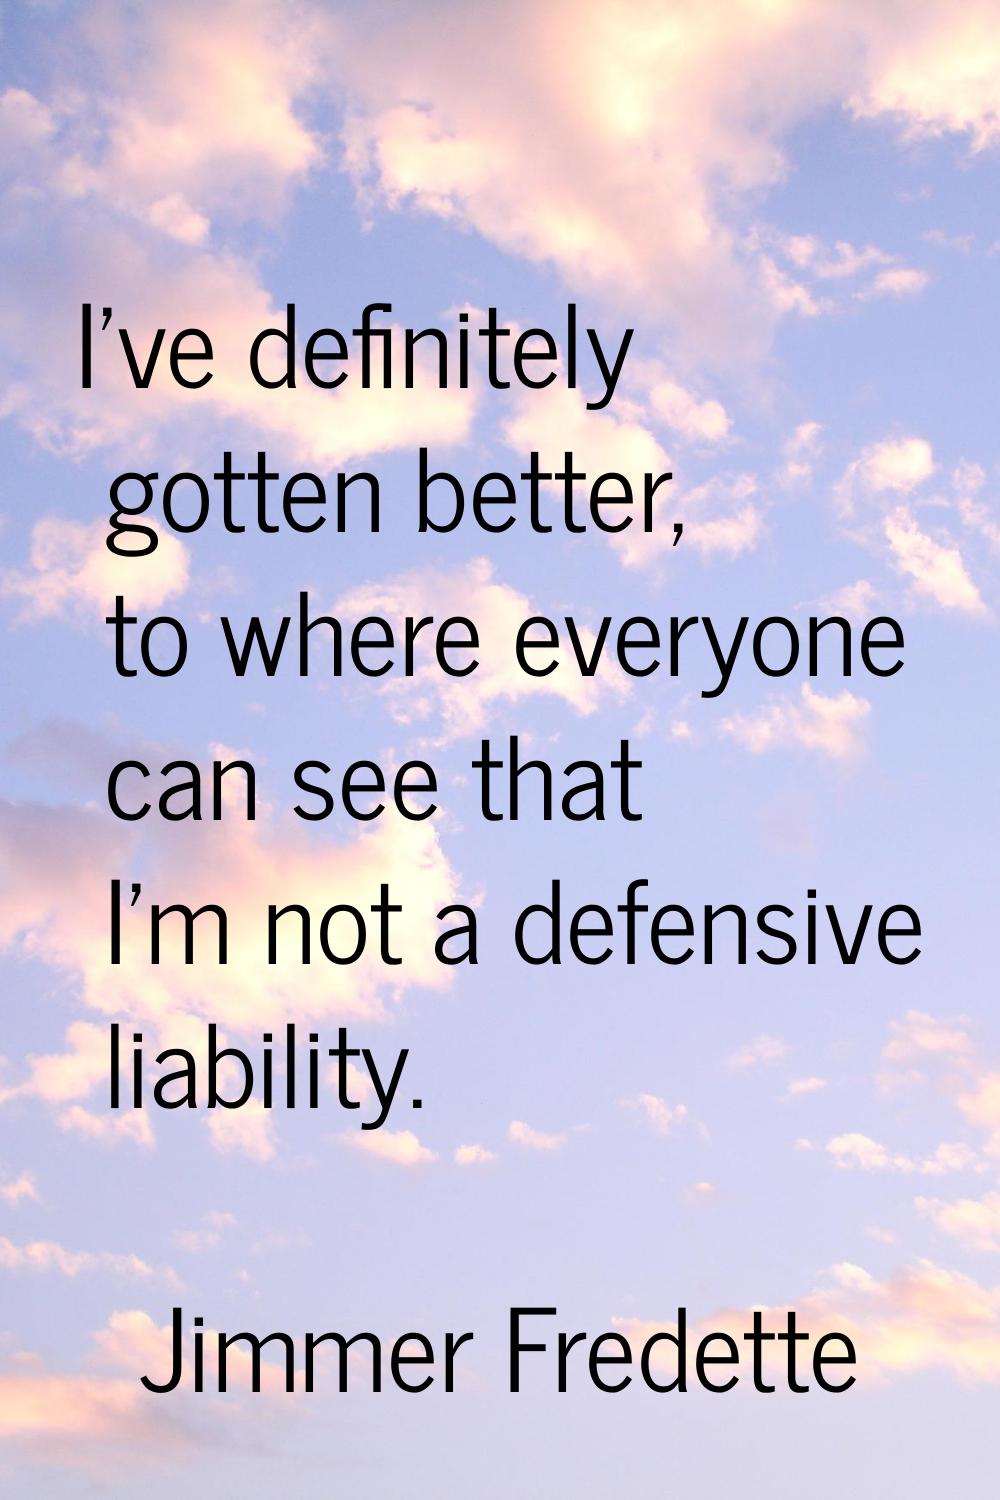 I've definitely gotten better, to where everyone can see that I'm not a defensive liability.